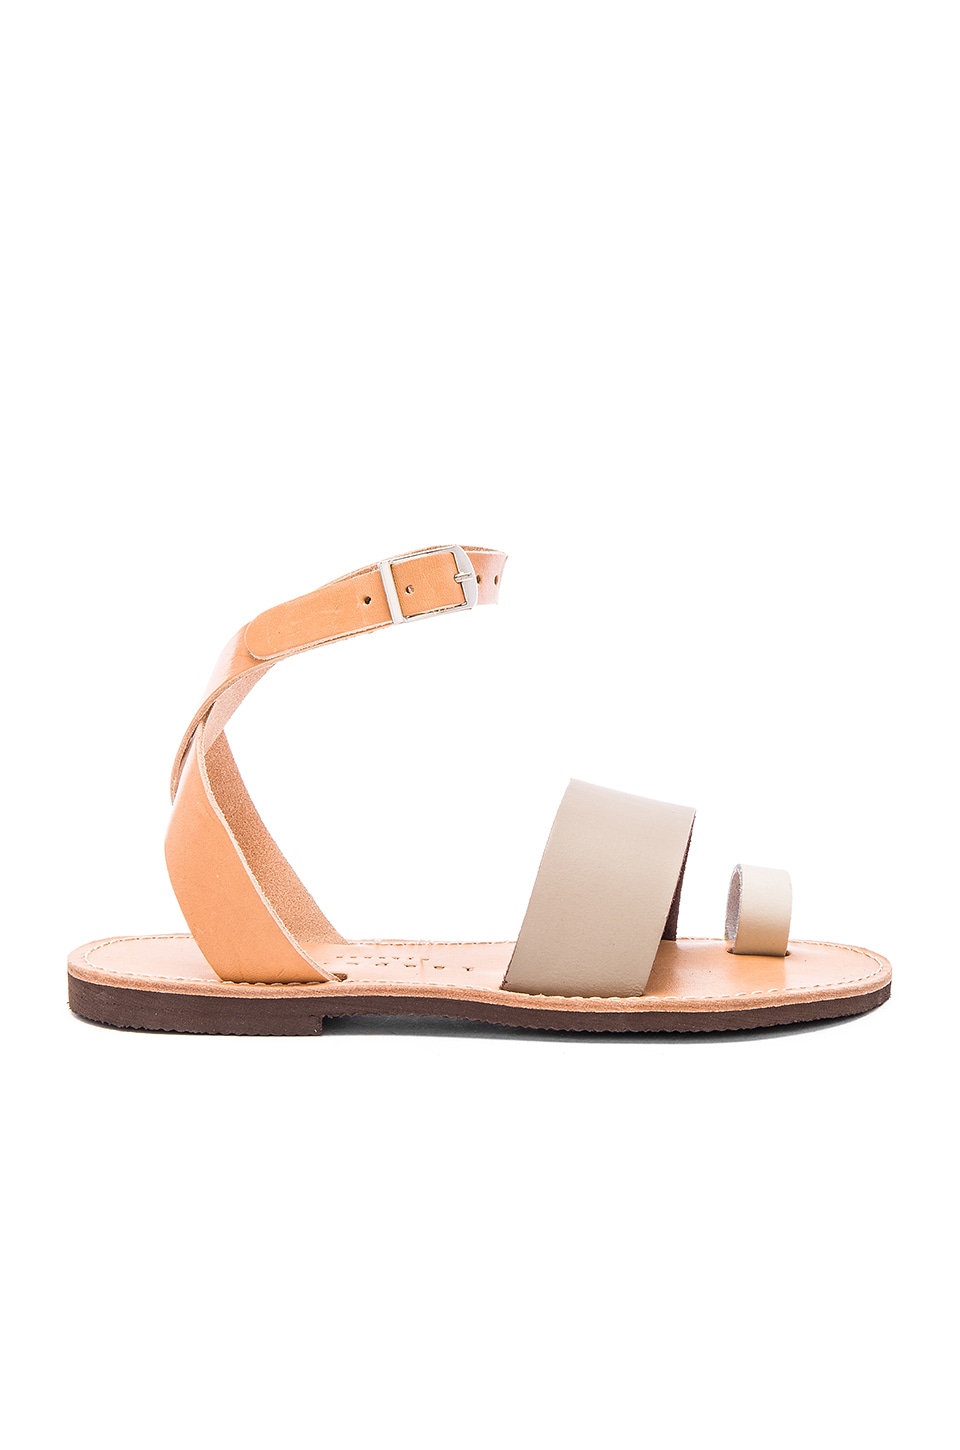 isapera Dune Sandal in Taupe | REVOLVE